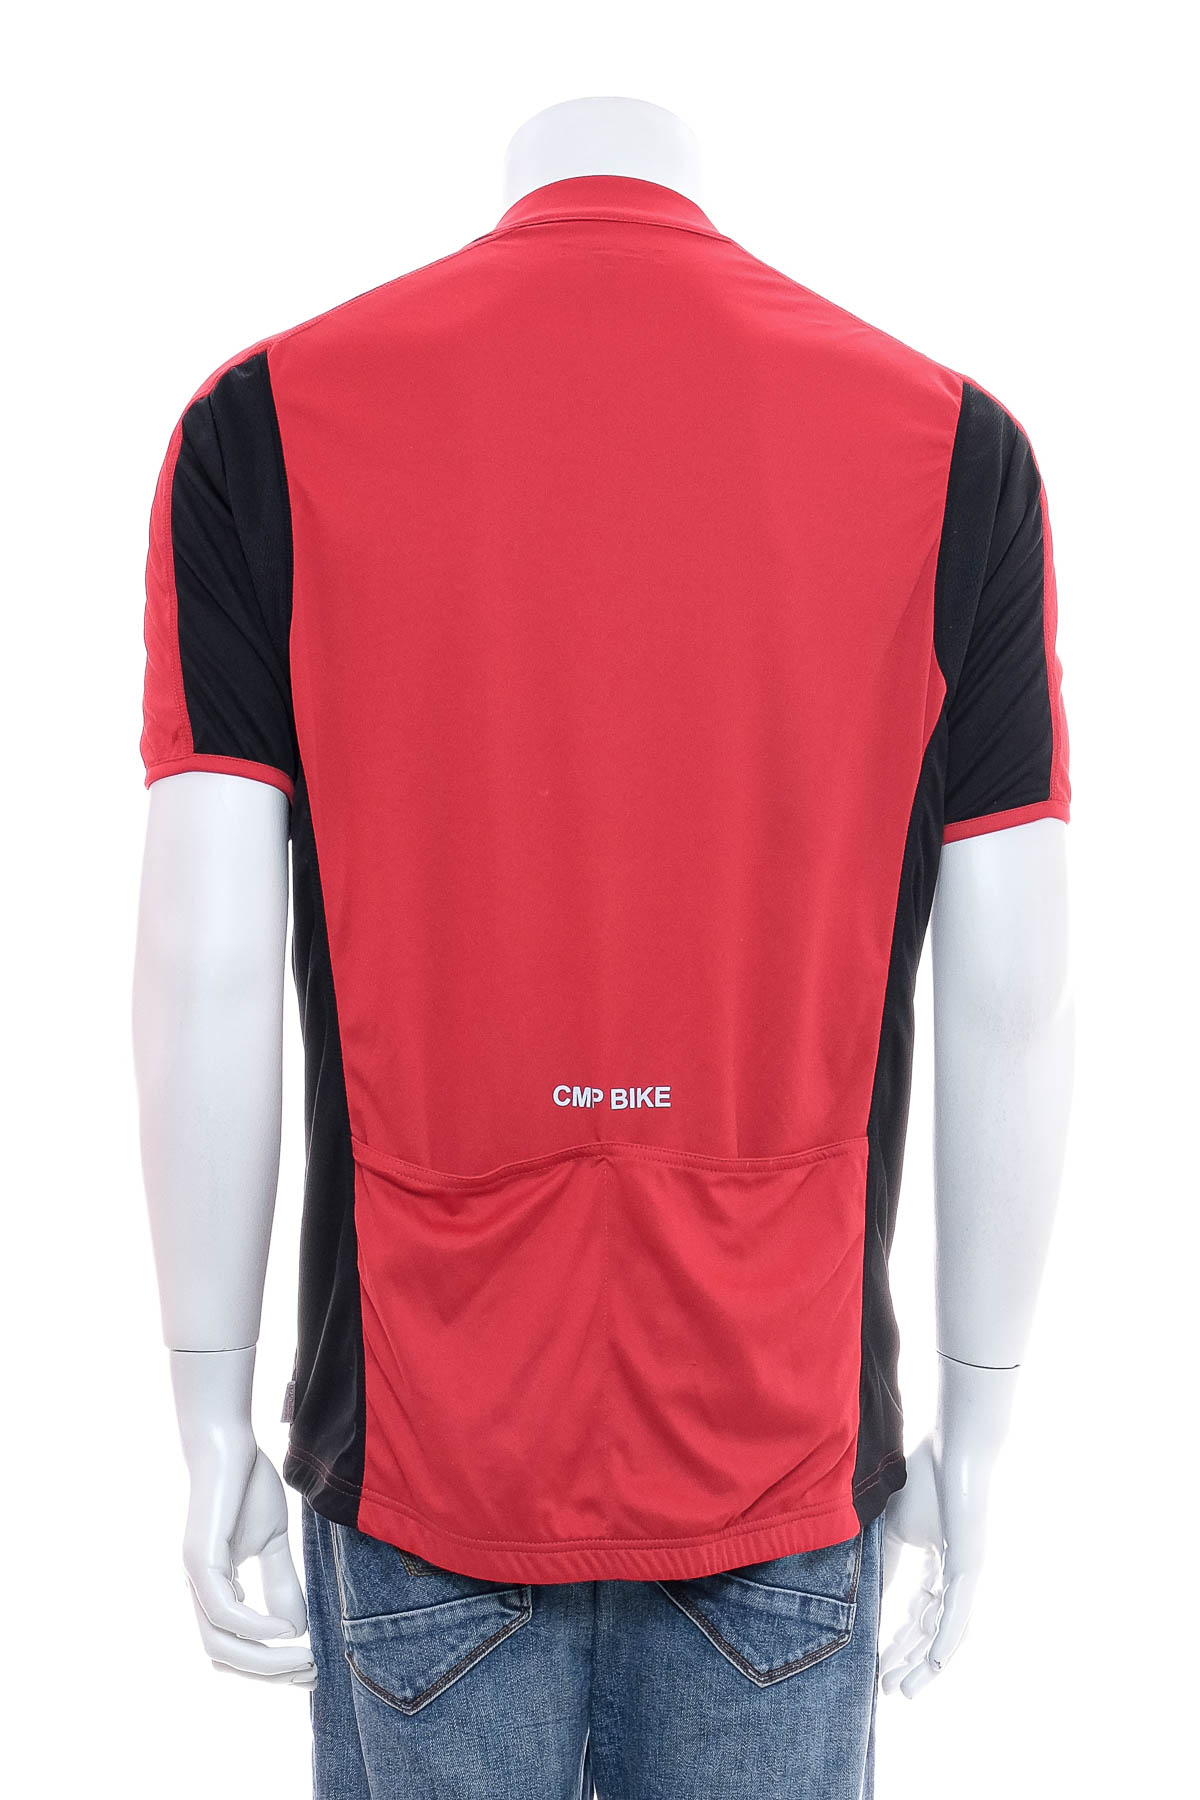 Male sports top for cycling - CMP BIKE - 1